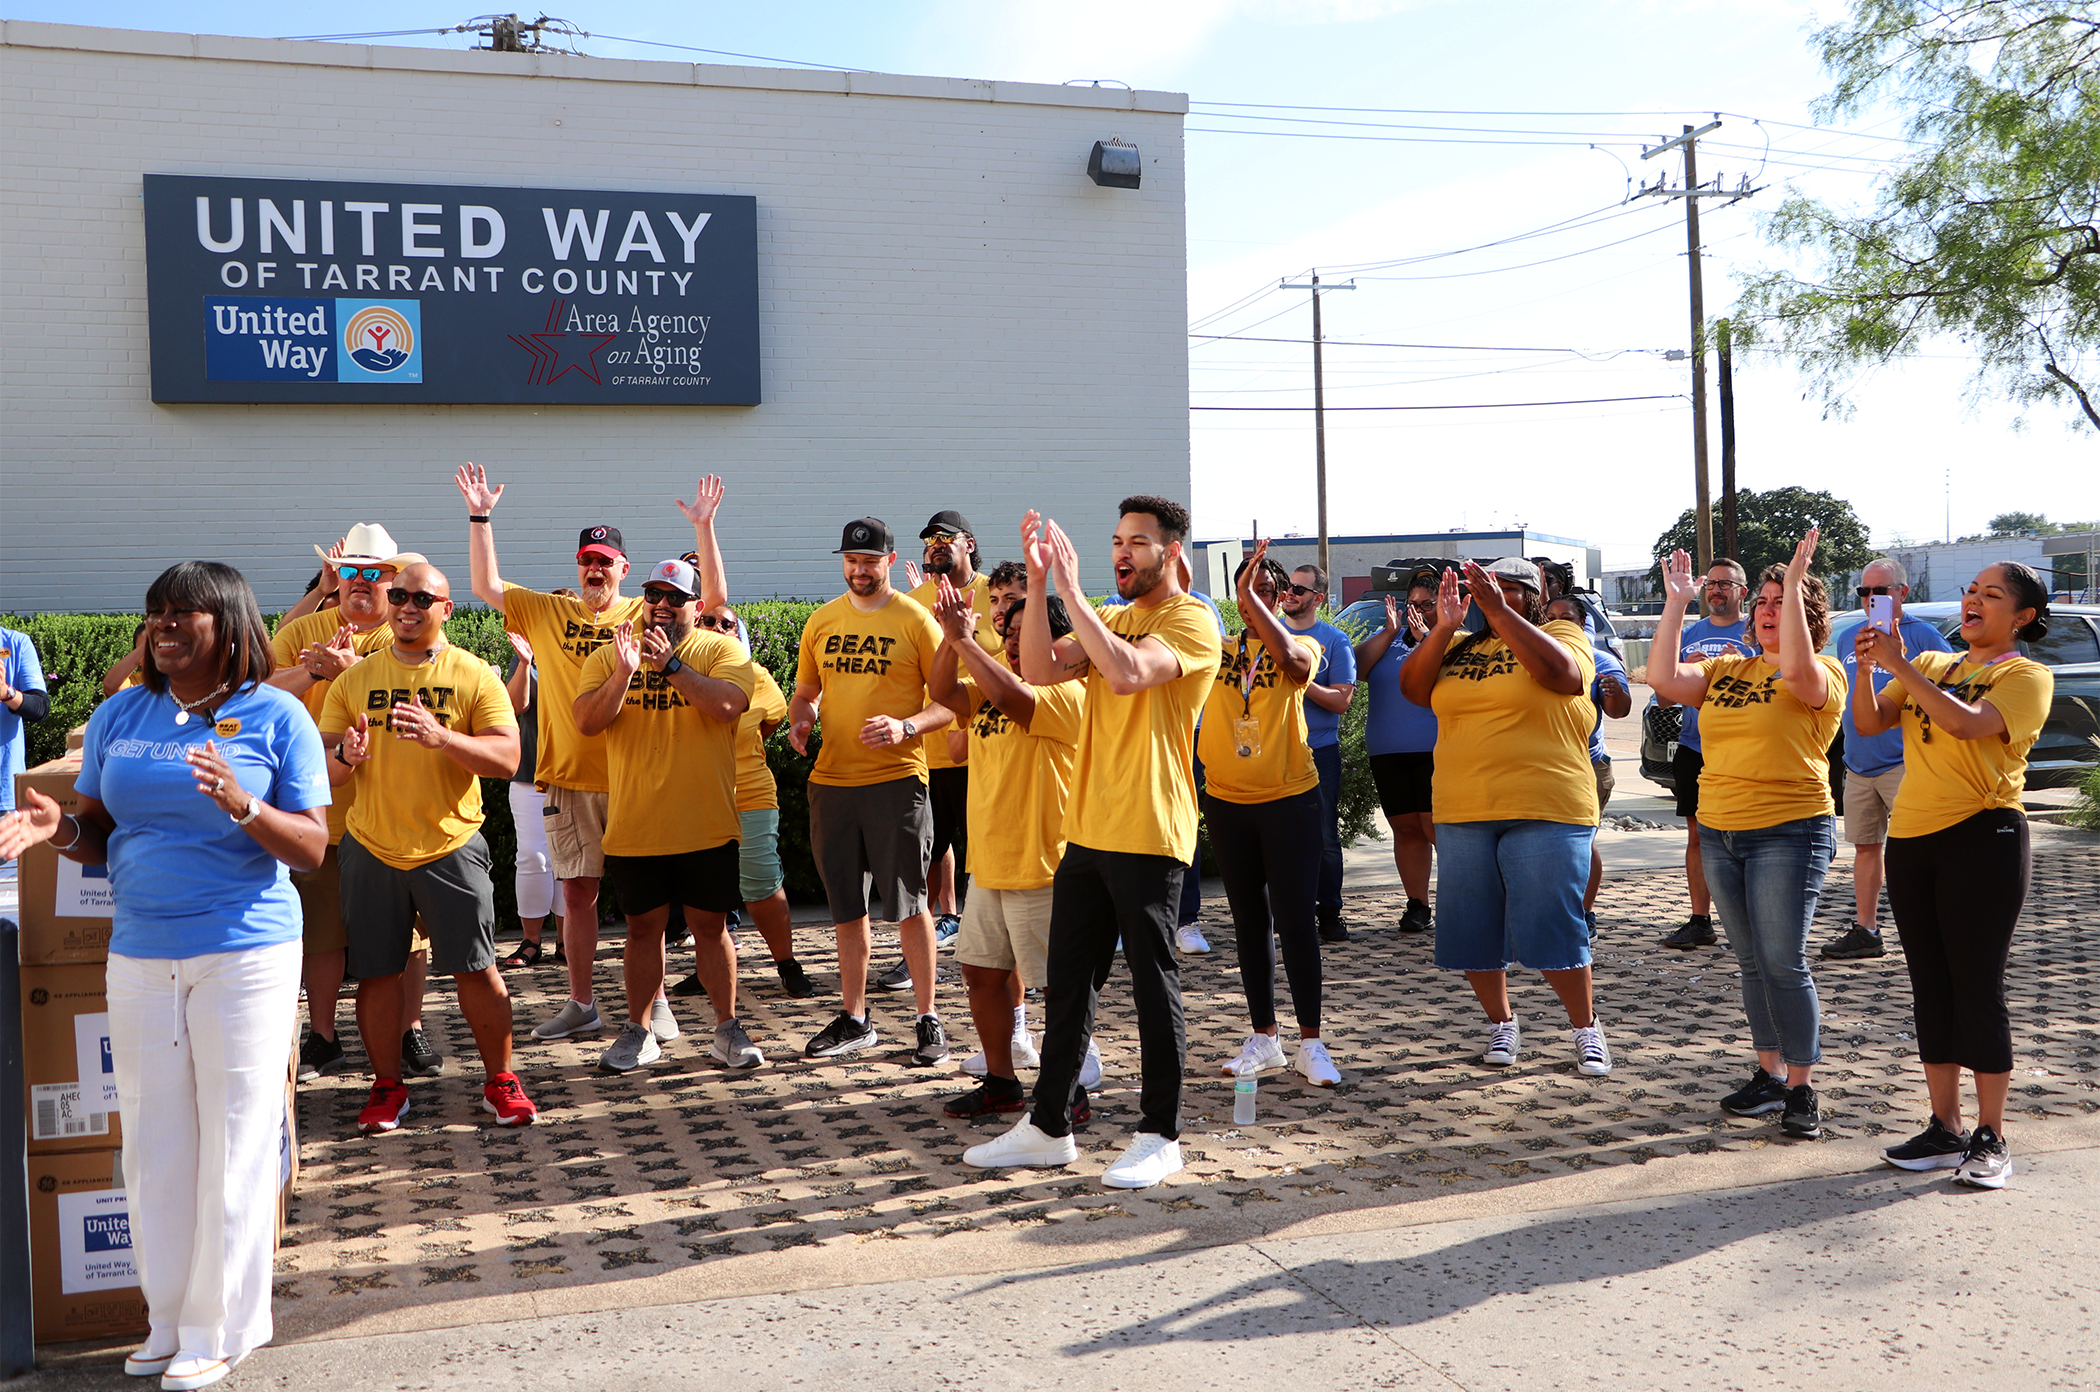 Volunteers gather for UWTC's Day of Action, the official launch of our Beat the Heat program.